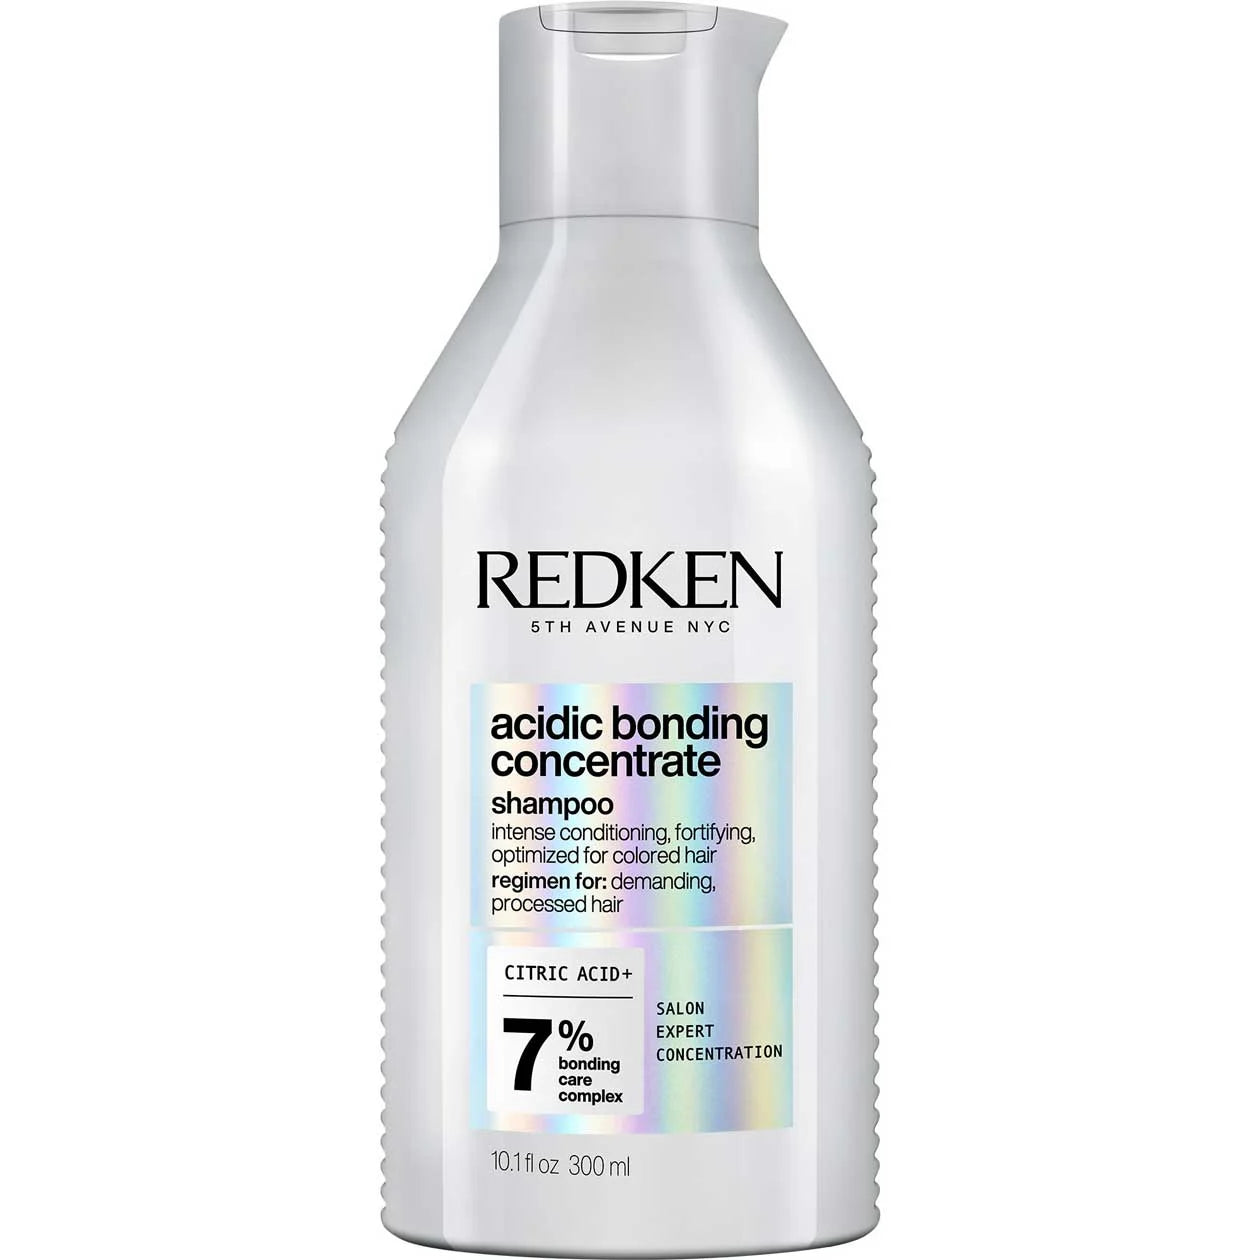 ACIDIC BONDING CONCENTRATE SHAMPOO FOR DAMAGED HAIR - 10.1 oz (Buy 3 Get 1 Free Mix & Match)